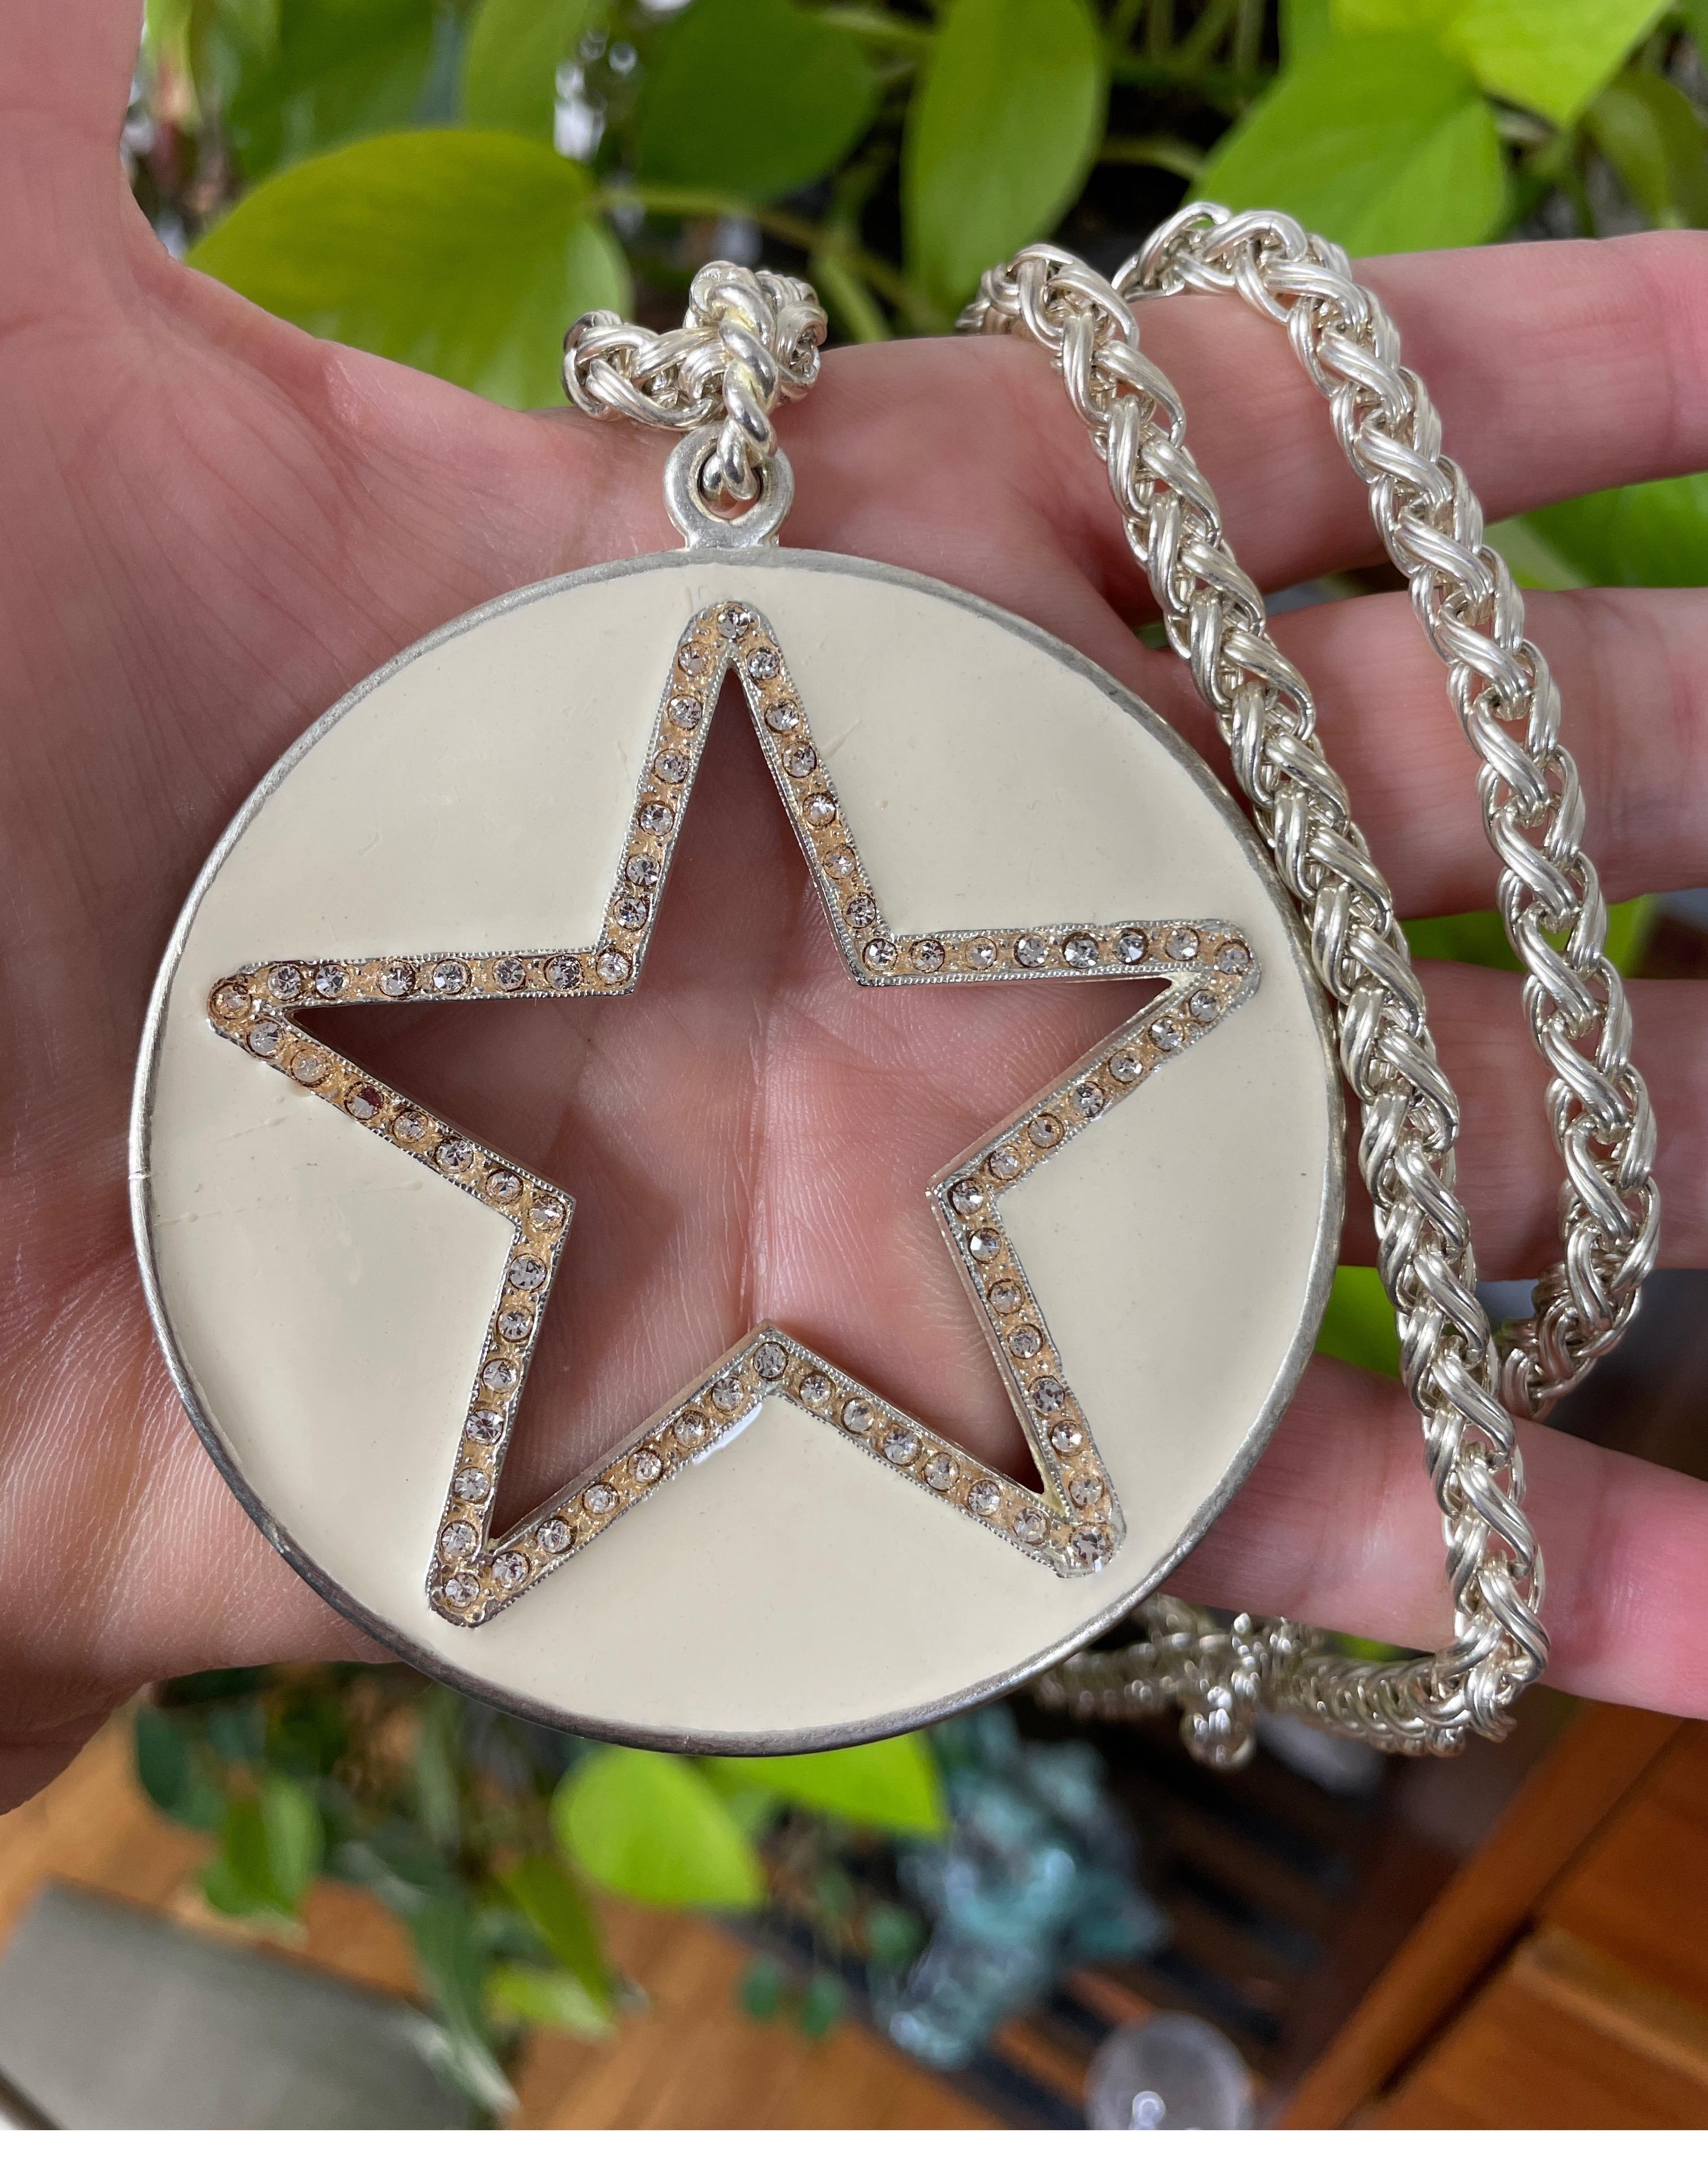  Be a STAR Enameled Crystal Long Necklace Pendant New, Never worn 1990s  1